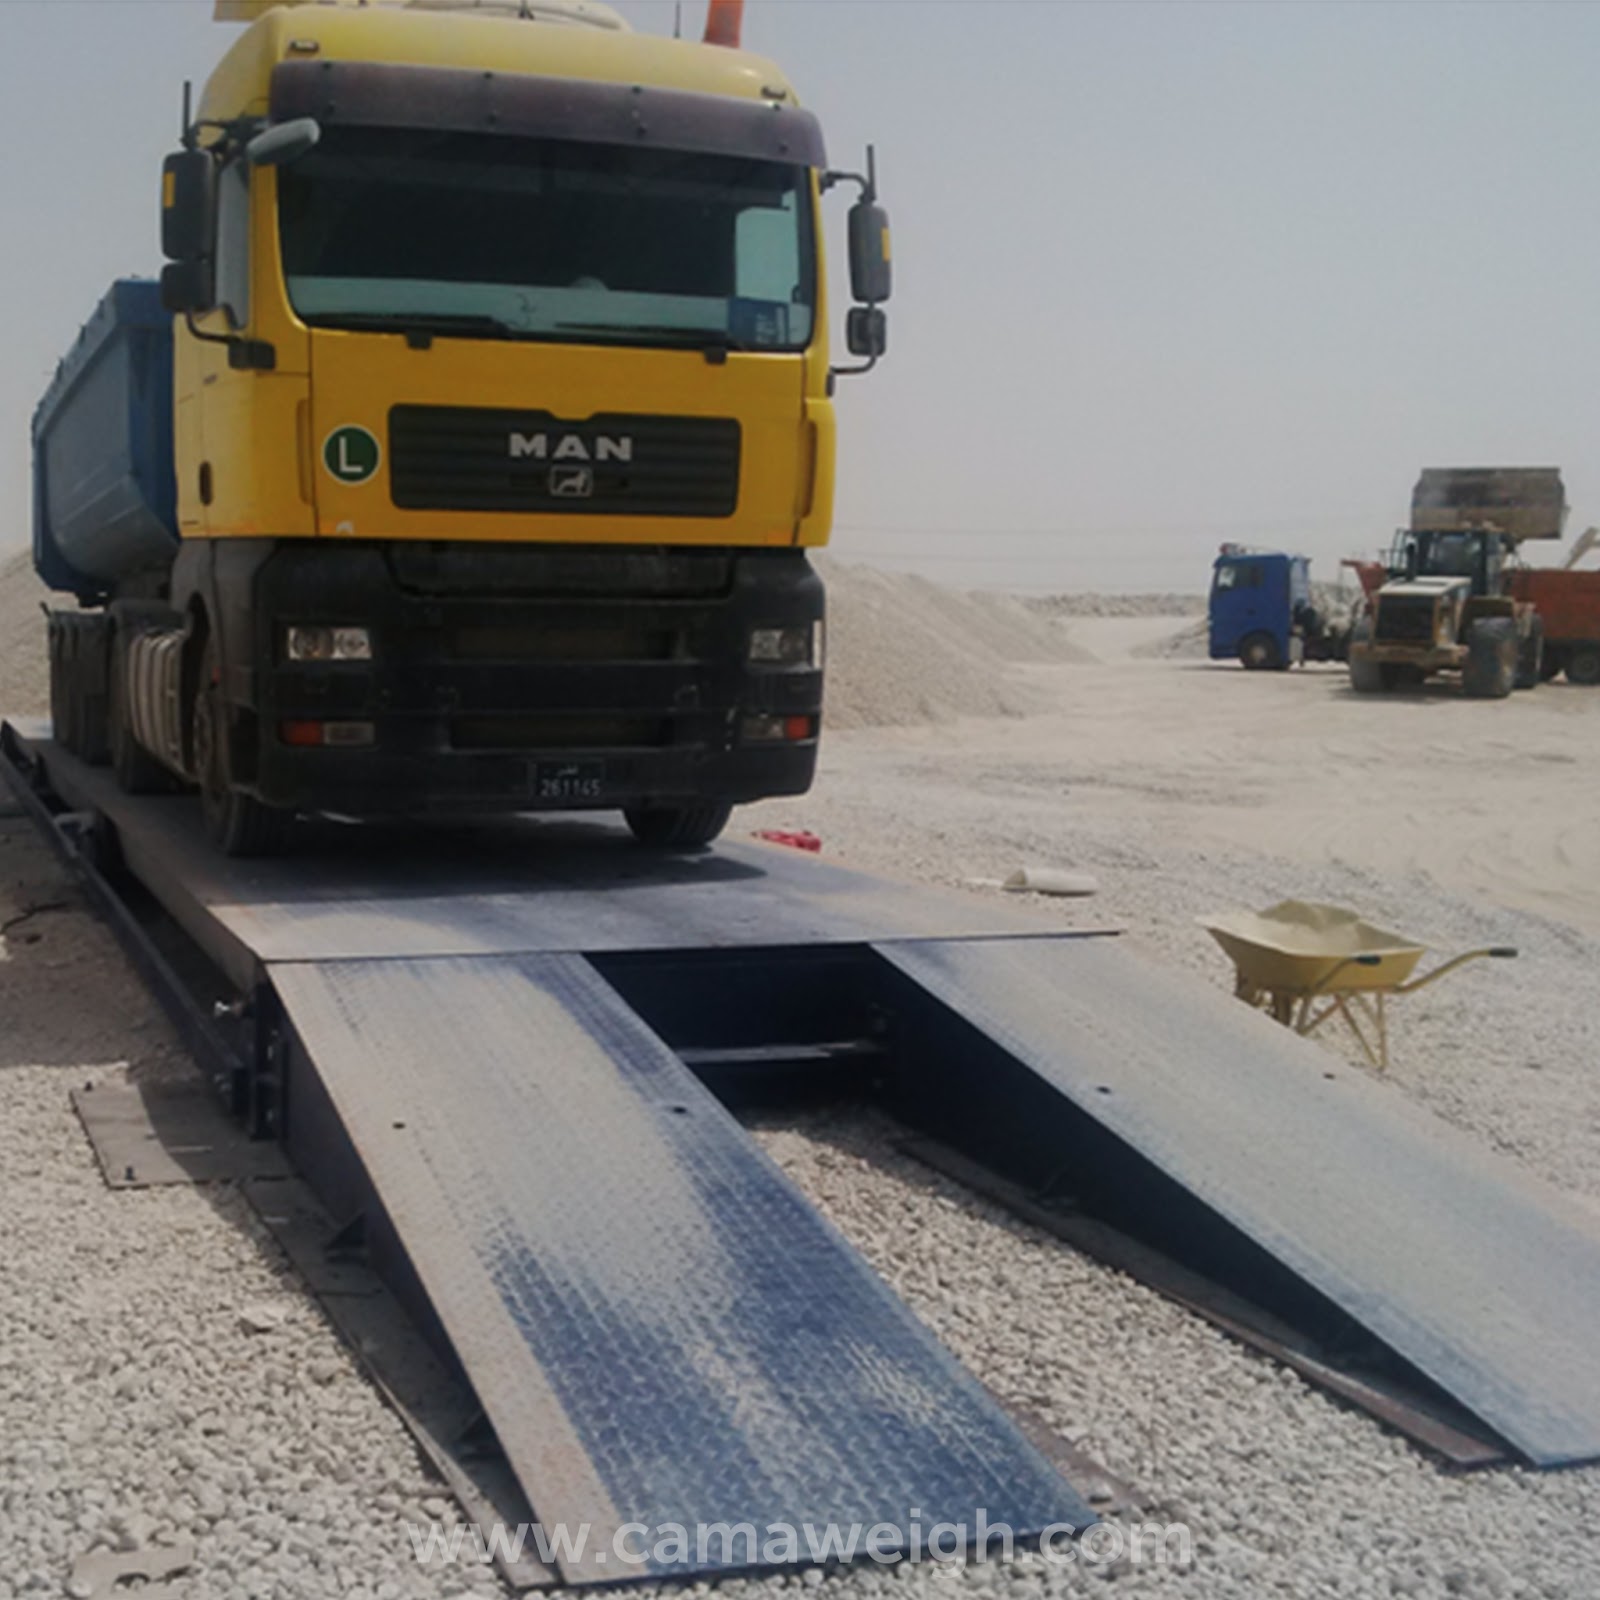 Static Weighing Example Using Movable Weighbridge